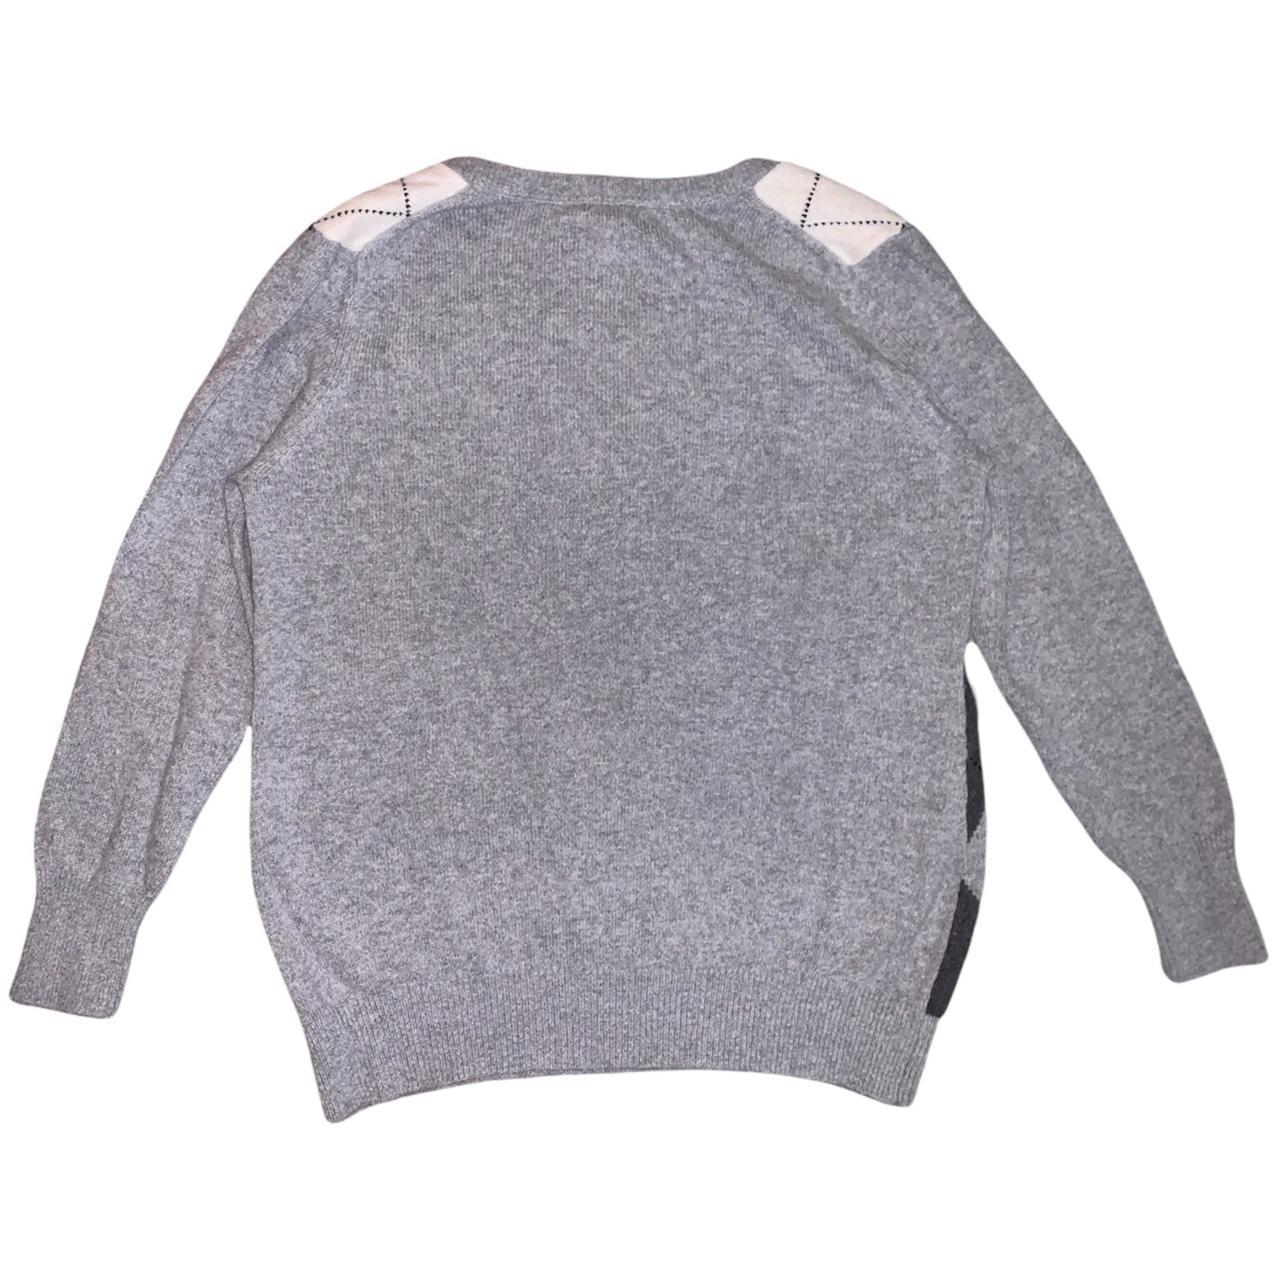 Old Navy Women's Grey and White Jumper (2)